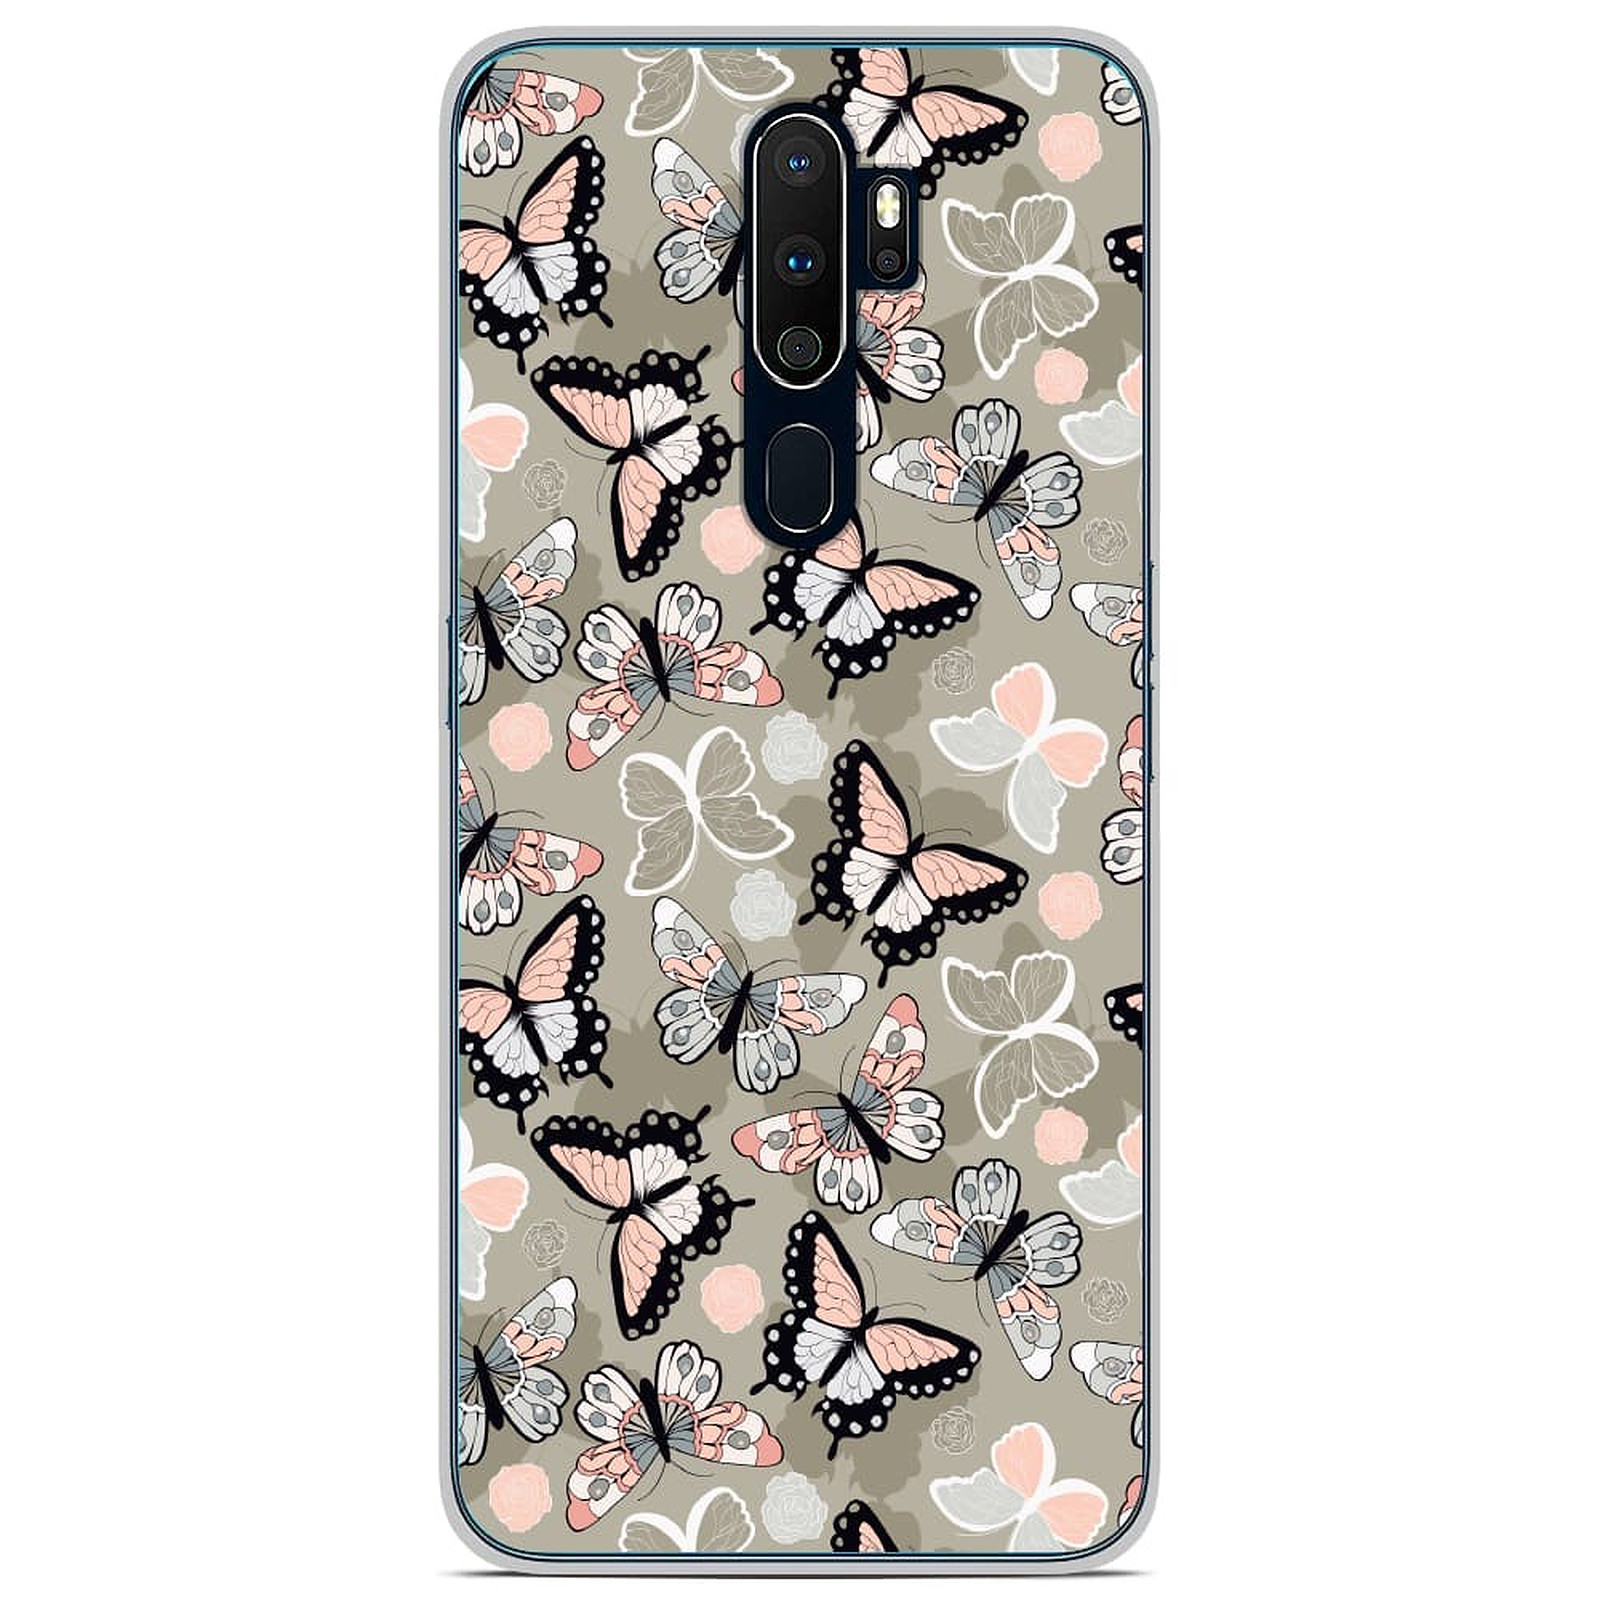 1001 Coques Coque silicone gel Oppo A5 2020 motif Papillons Vintage - Coque telephone 1001Coques